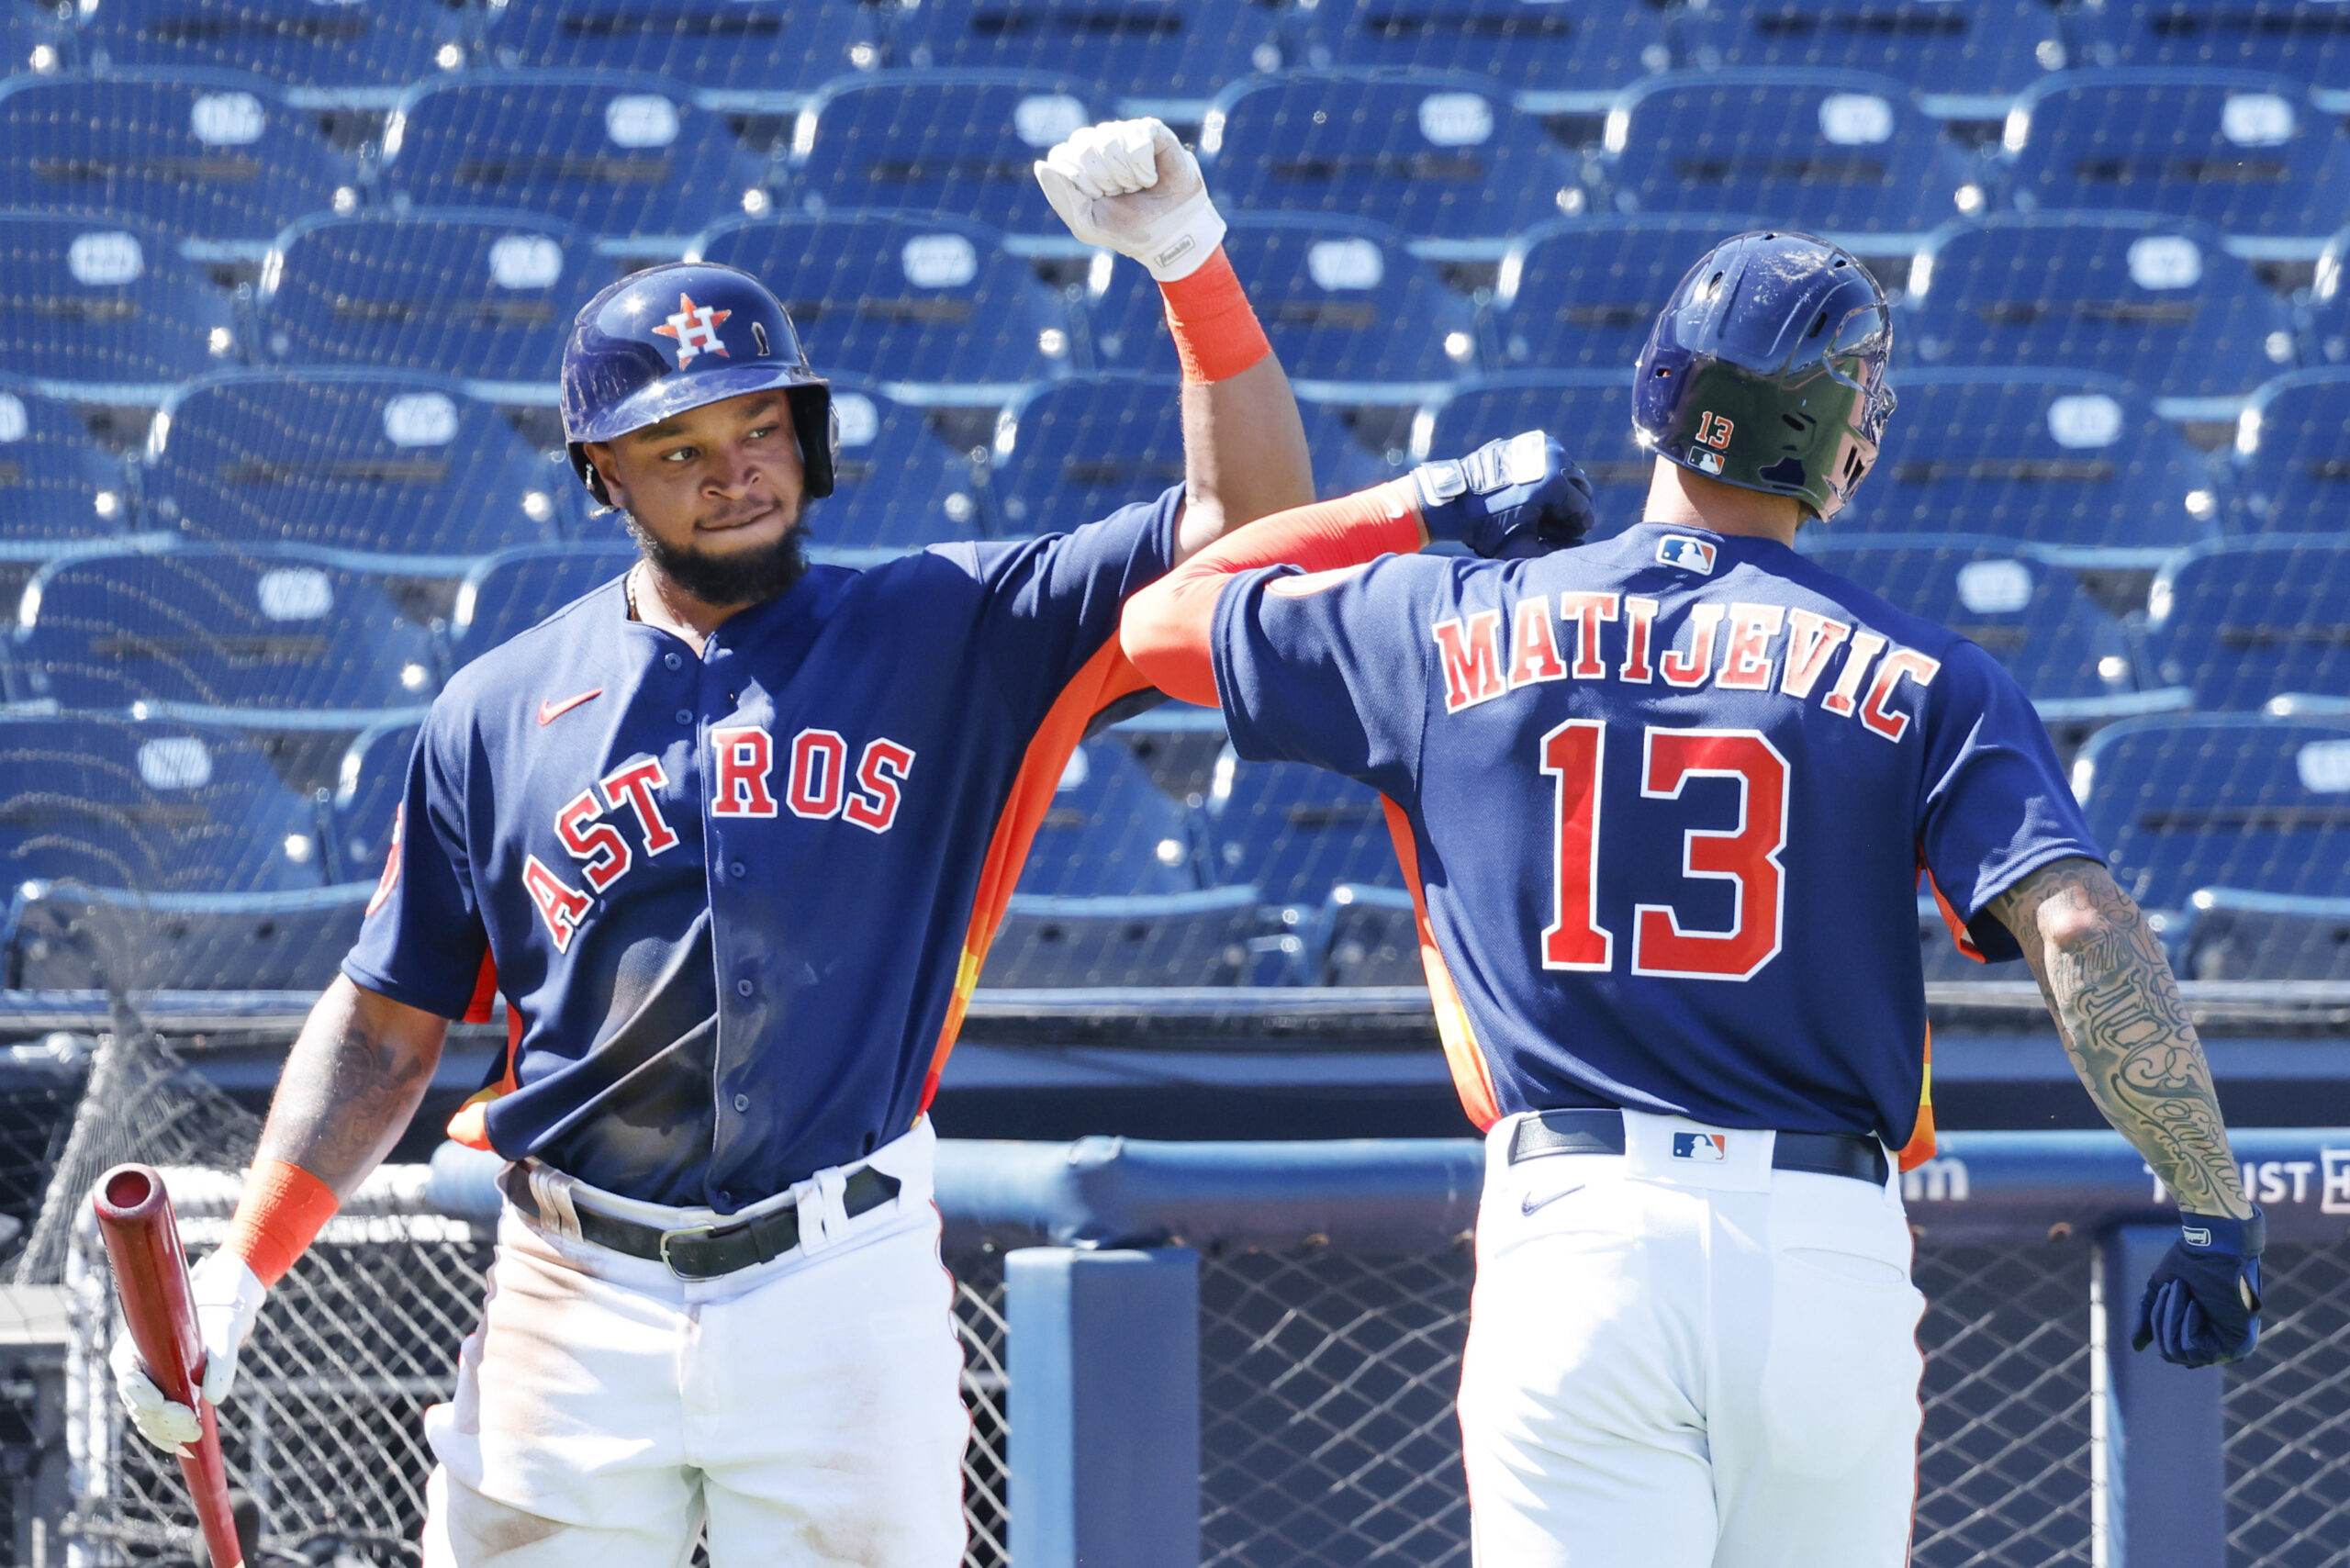 Feb 27, 2023; West Palm Beach, Florida, USA; Houston Astros right fielder Corey Julks (87) congratulates Houston Astros first baseman J.J. Matijevic (13) on scoring a run during the third inning against the Miami Marlins at The Ballpark of the Palm Beaches.